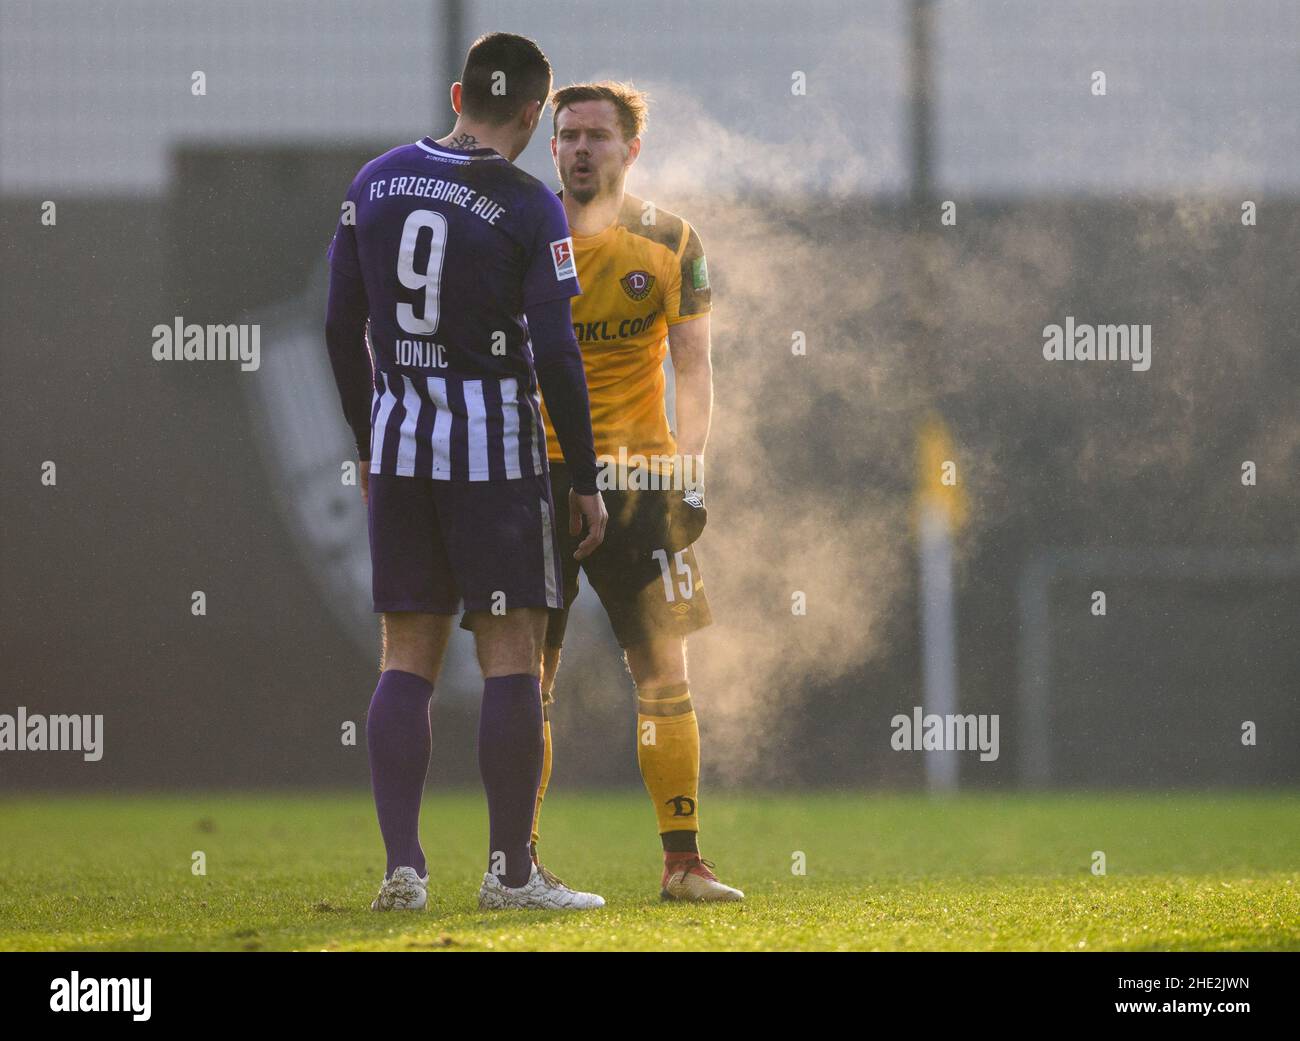 08 January 2022, Saxony, Dresden: Soccer: 2. Bundesliga, Test matches, SG Dynamo Dresden - FC Erzgebirge Aue, Aok Plus Walter-Fritzsch-Akademie. Dynamo's Chris Löwe (r) has a steamy chat with Aue's Antonio Jonjic. Photo: Robert Michael/dpa-Zentralbild/ZB - IMPORTANT NOTE: In accordance with the requirements of the DFL Deutsche Fußball Liga and the DFB Deutscher Fußball-Bund, it is prohibited to use or have used photographs taken in the stadium and/or of the match in the form of sequence pictures and/or video-like photo series. Stock Photo